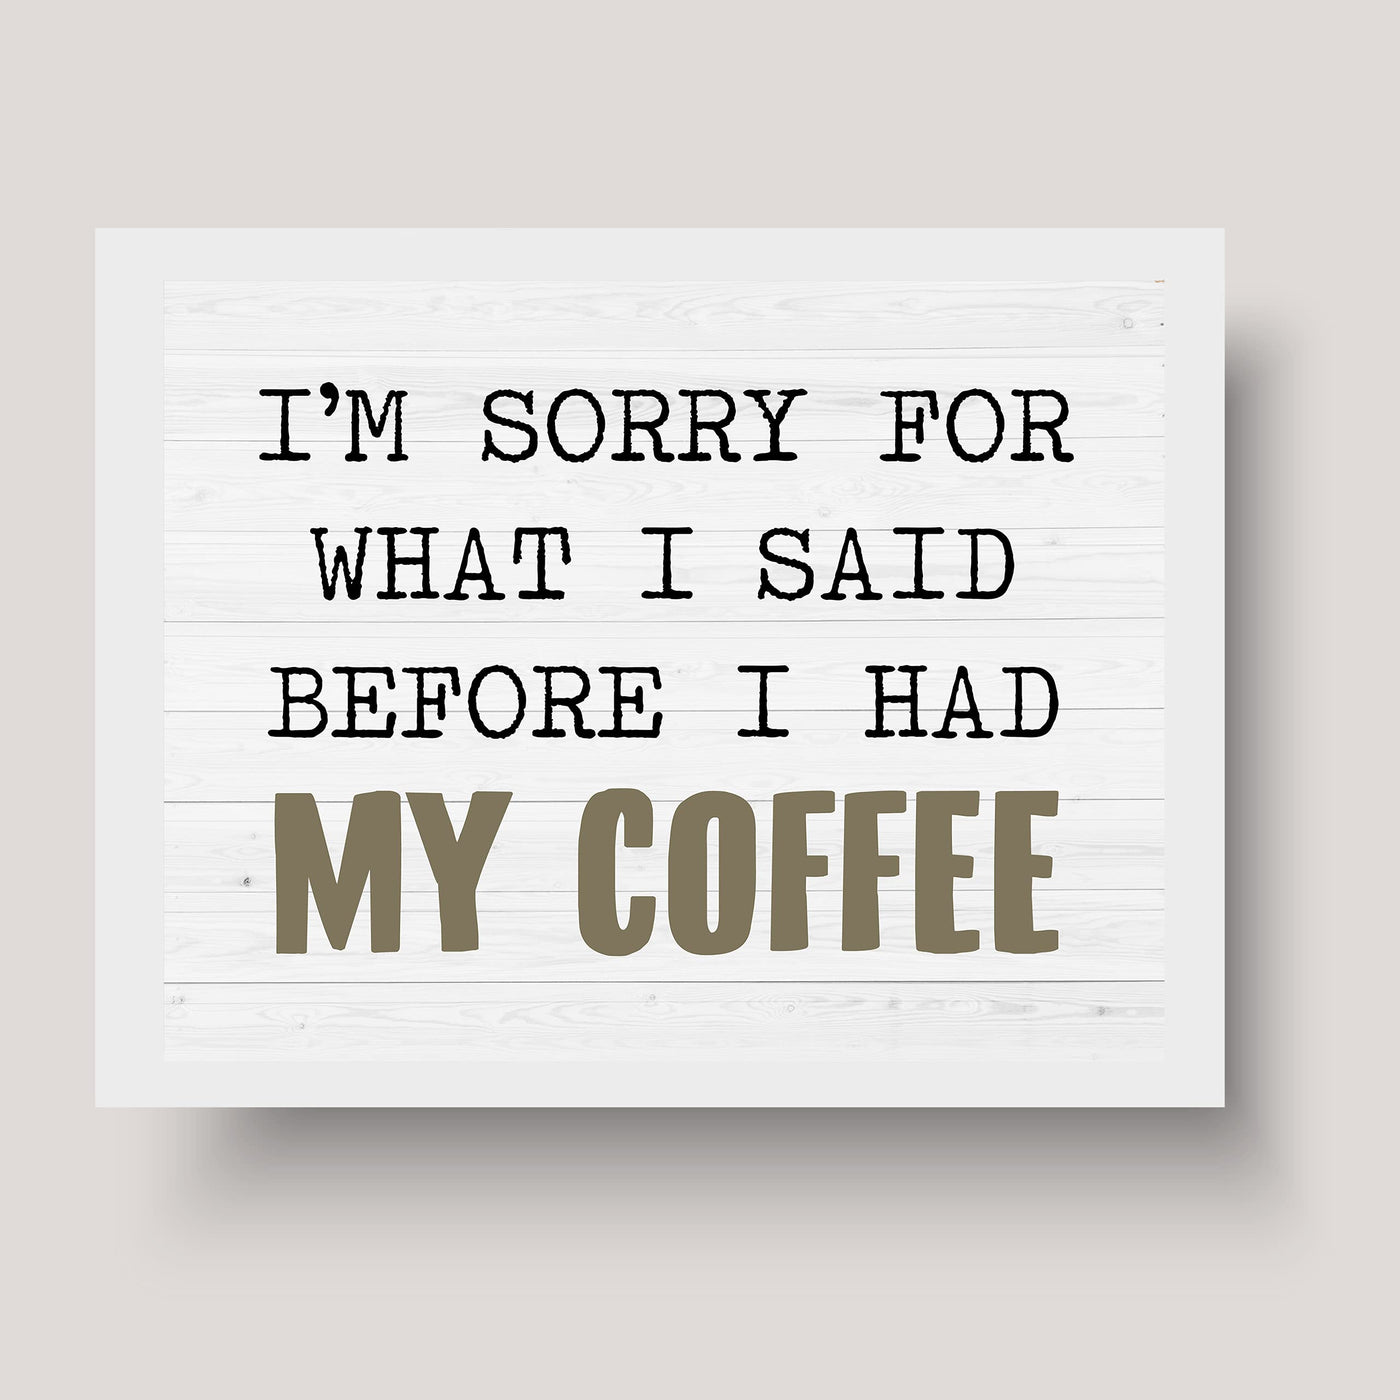 Sorry For What I Said Before I Had My Coffee Funny Wall Art-10 x 8" Typographic Art Print-Ready to Frame. Humorous Home-Kitchen-Office-Cafe-Java Bar Decor. Perfect Gift for Coffee Addicts!